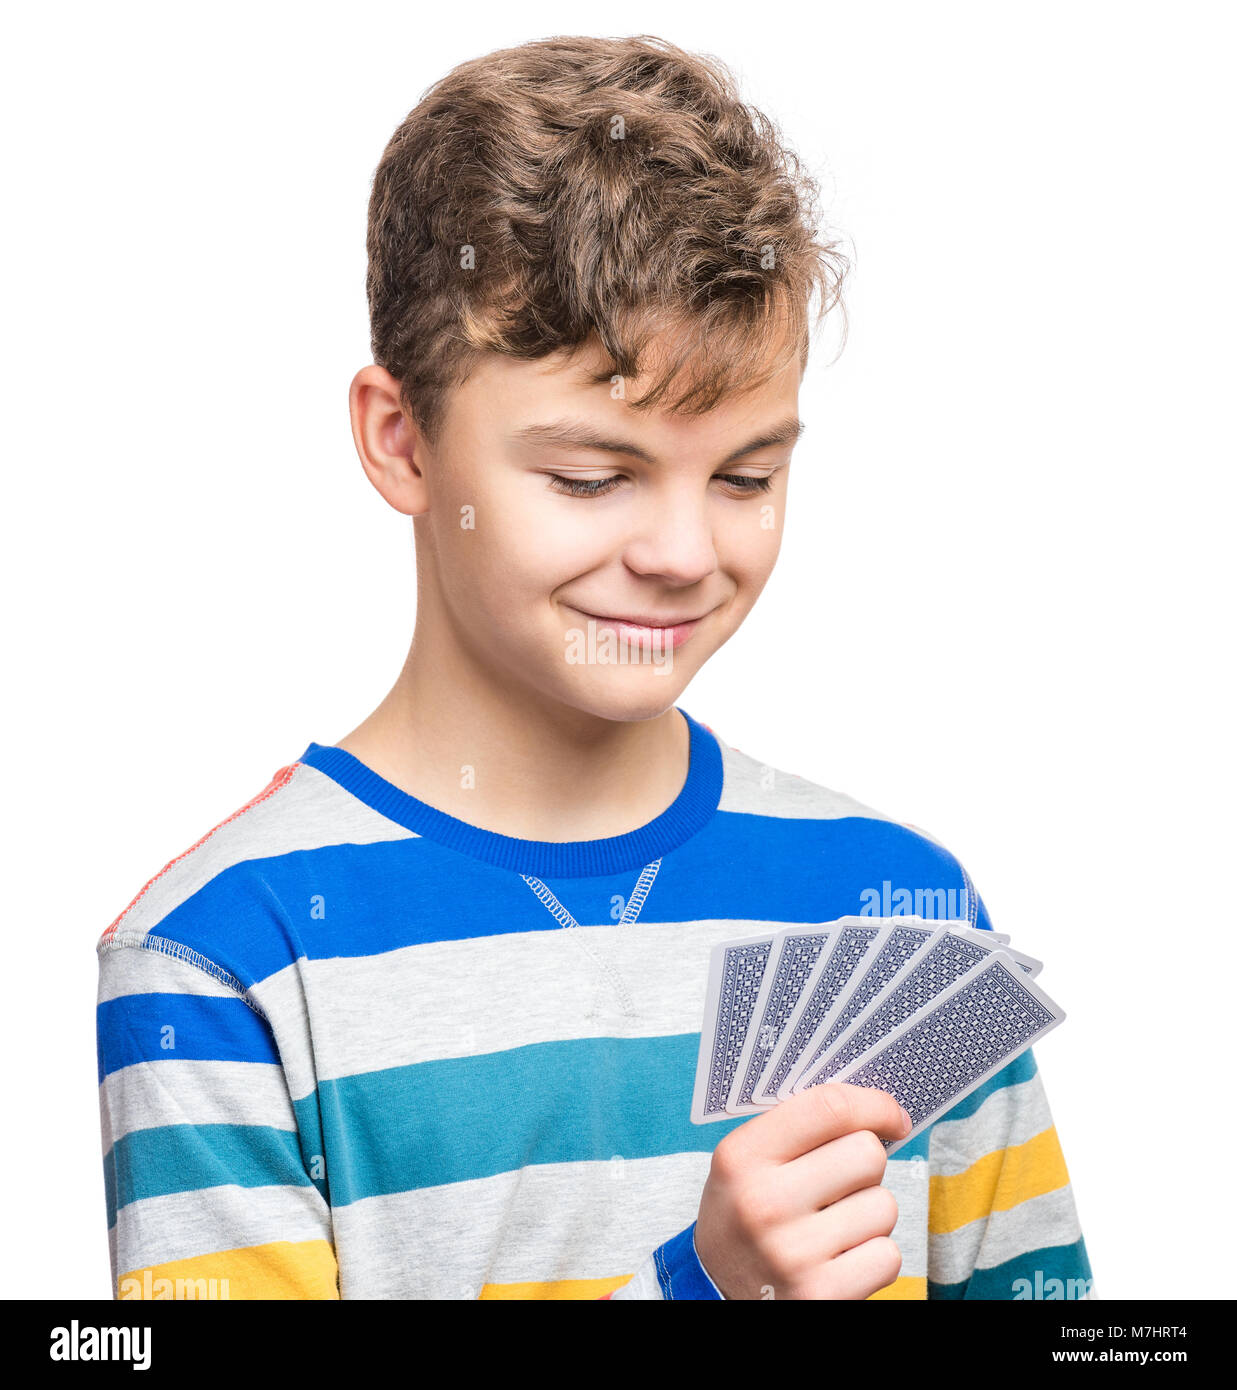 Teen boy with gamble cards Stock Photo